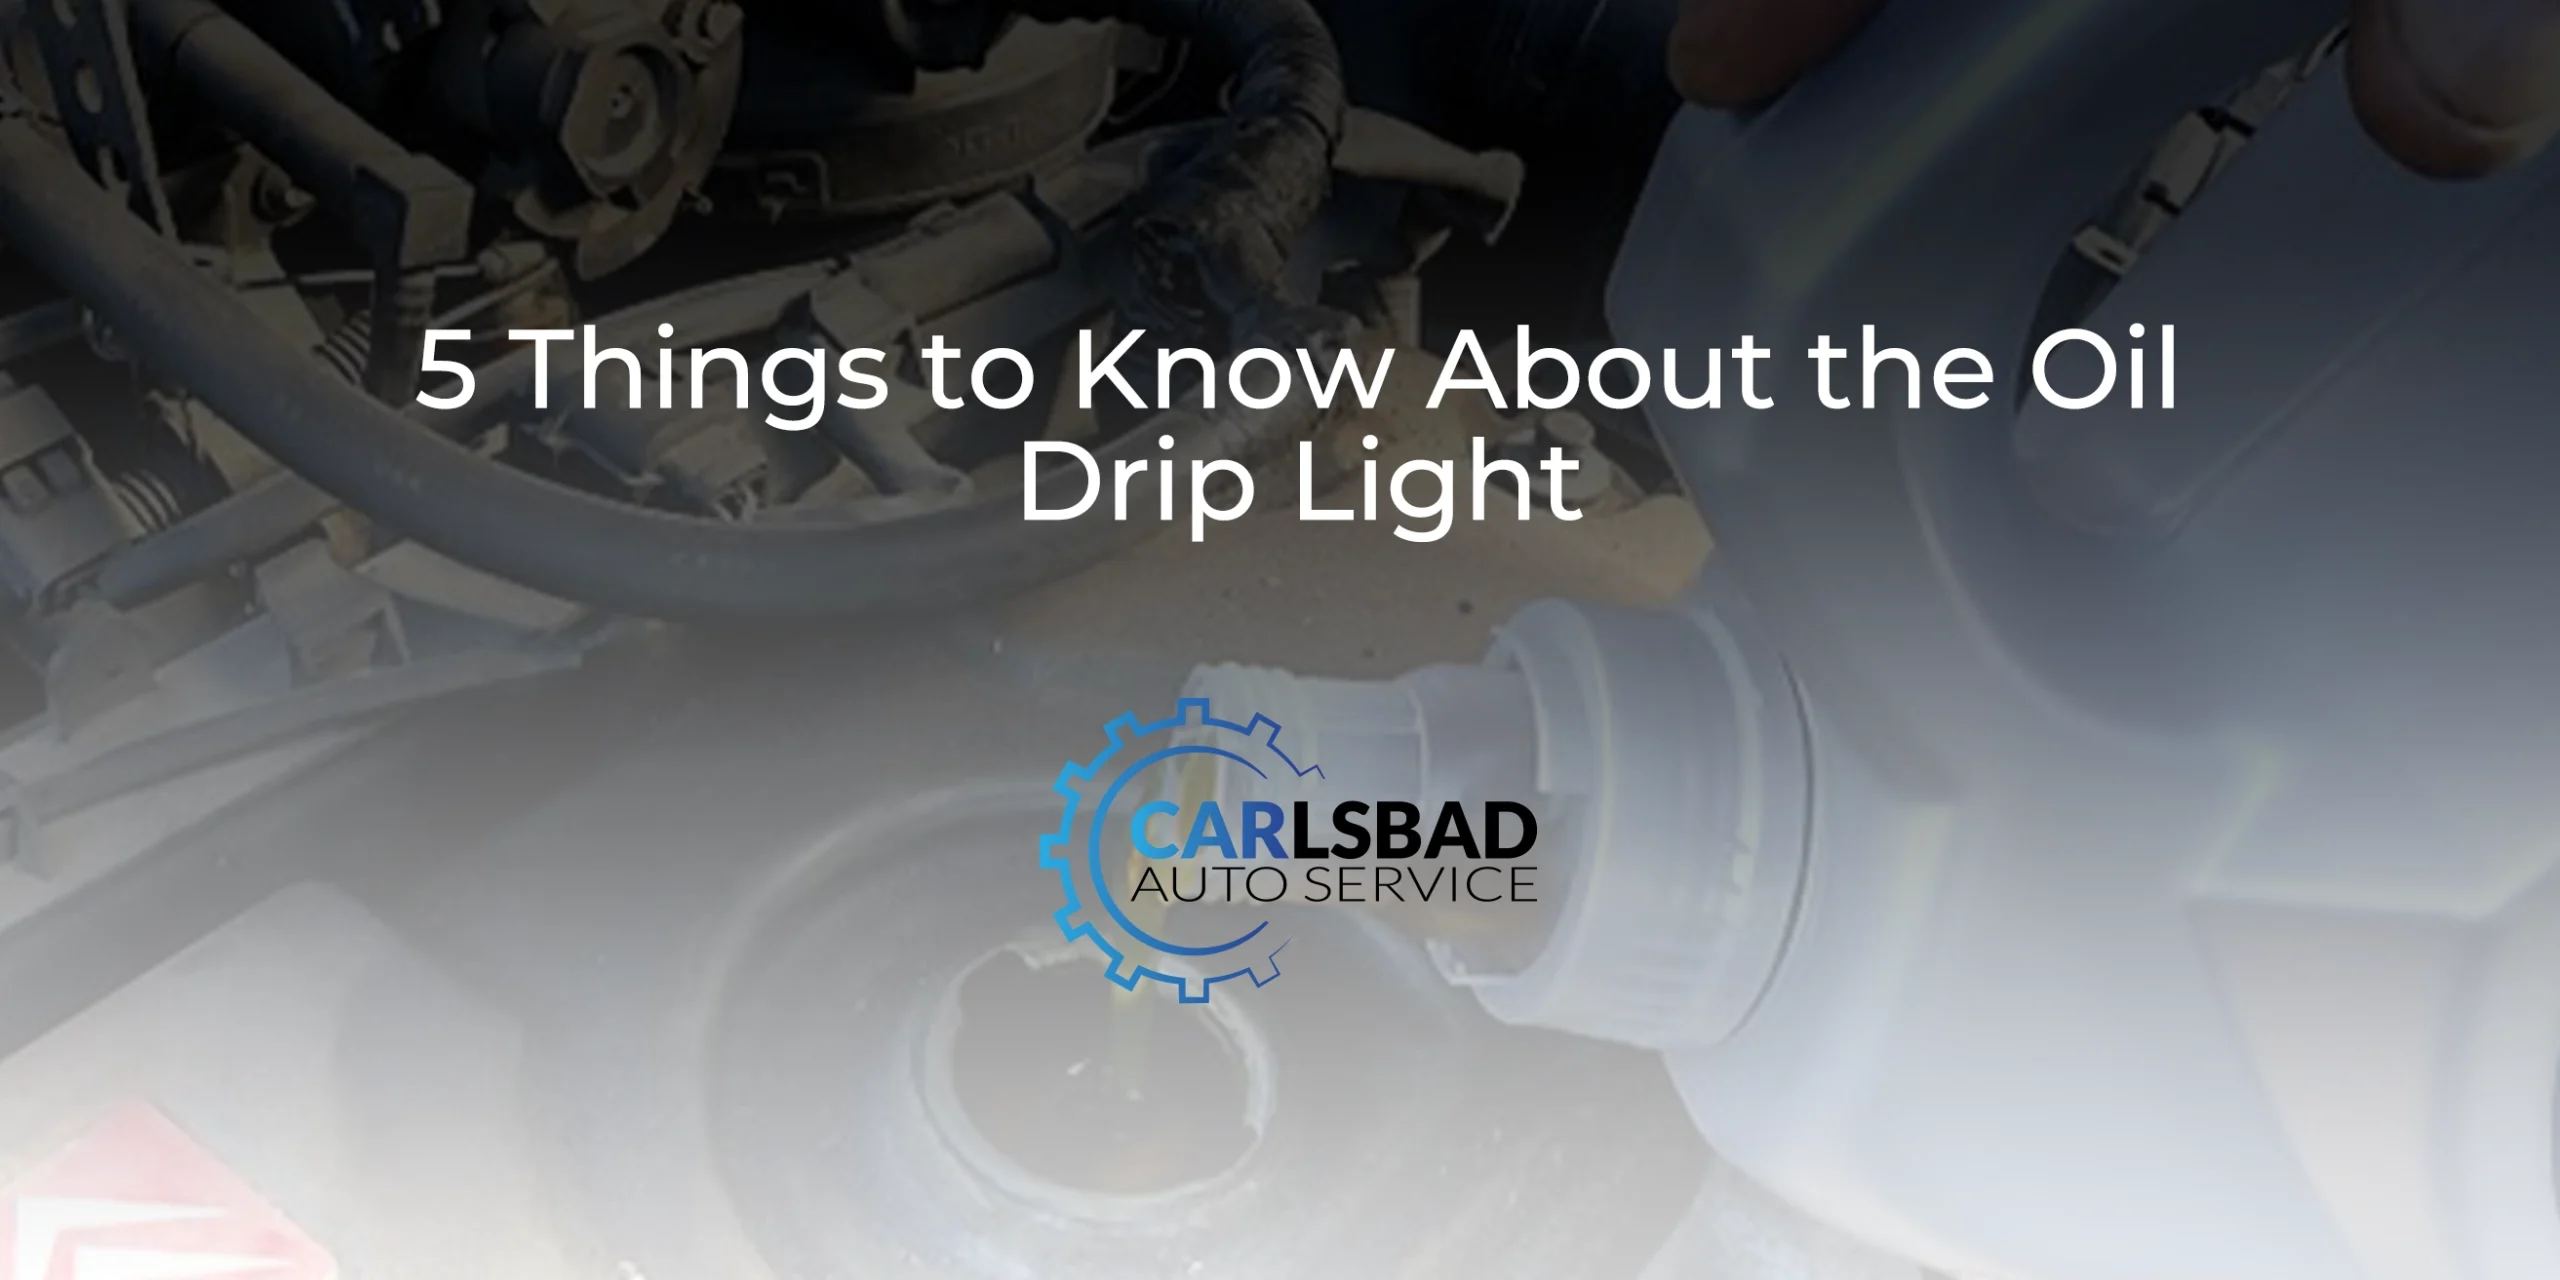 5 Things to Know About the Oil Drip Light